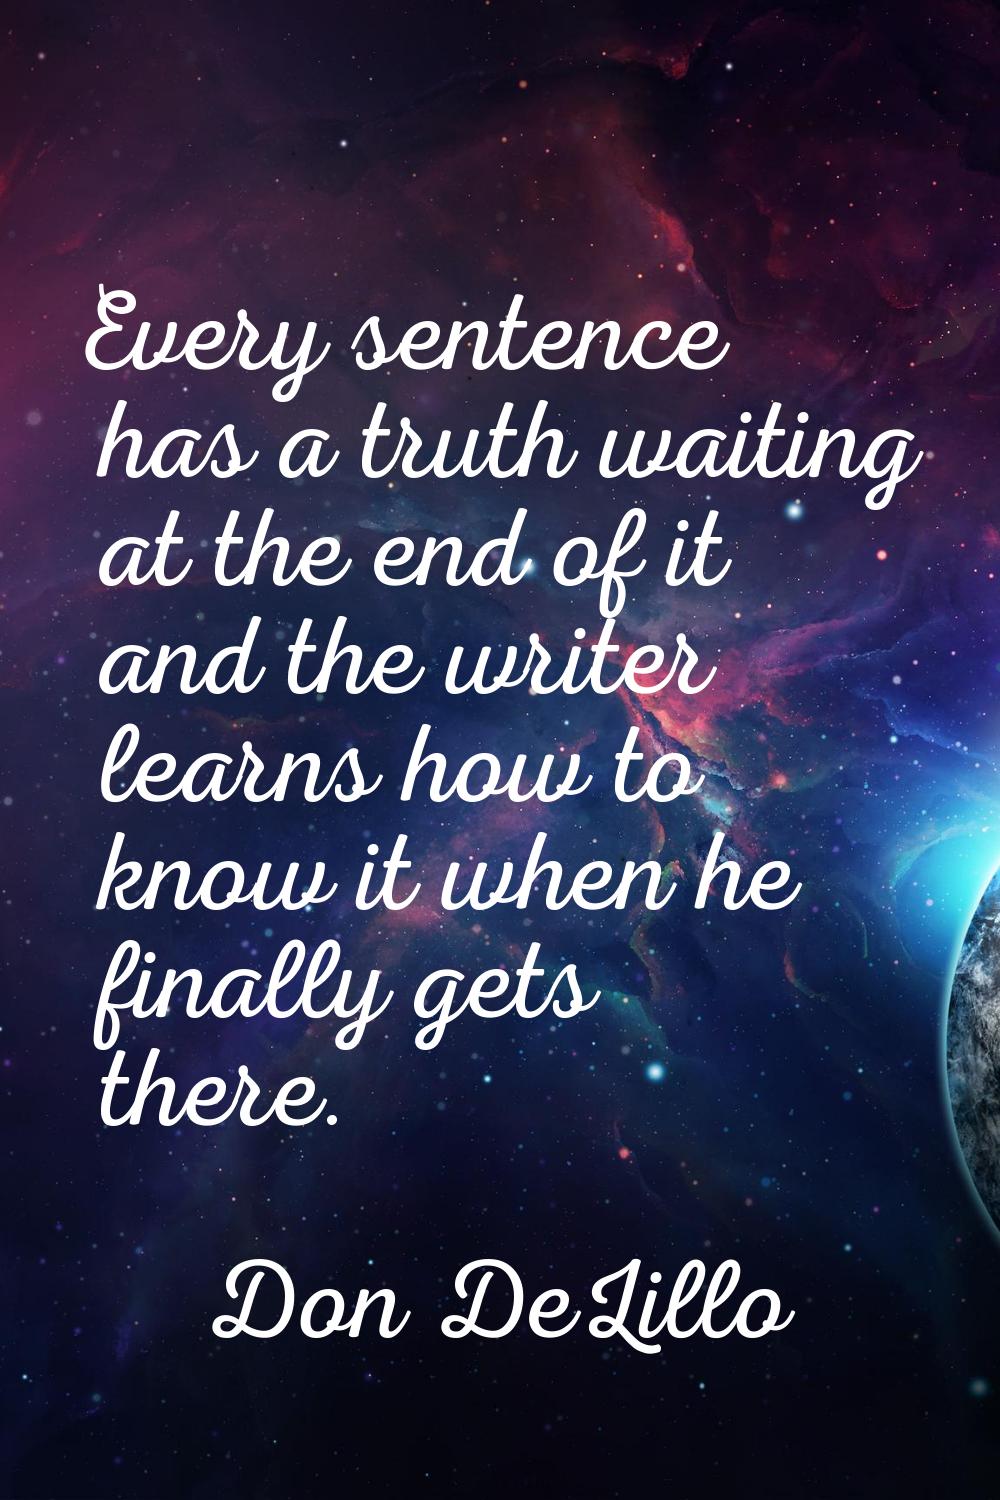 Every sentence has a truth waiting at the end of it and the writer learns how to know it when he fi